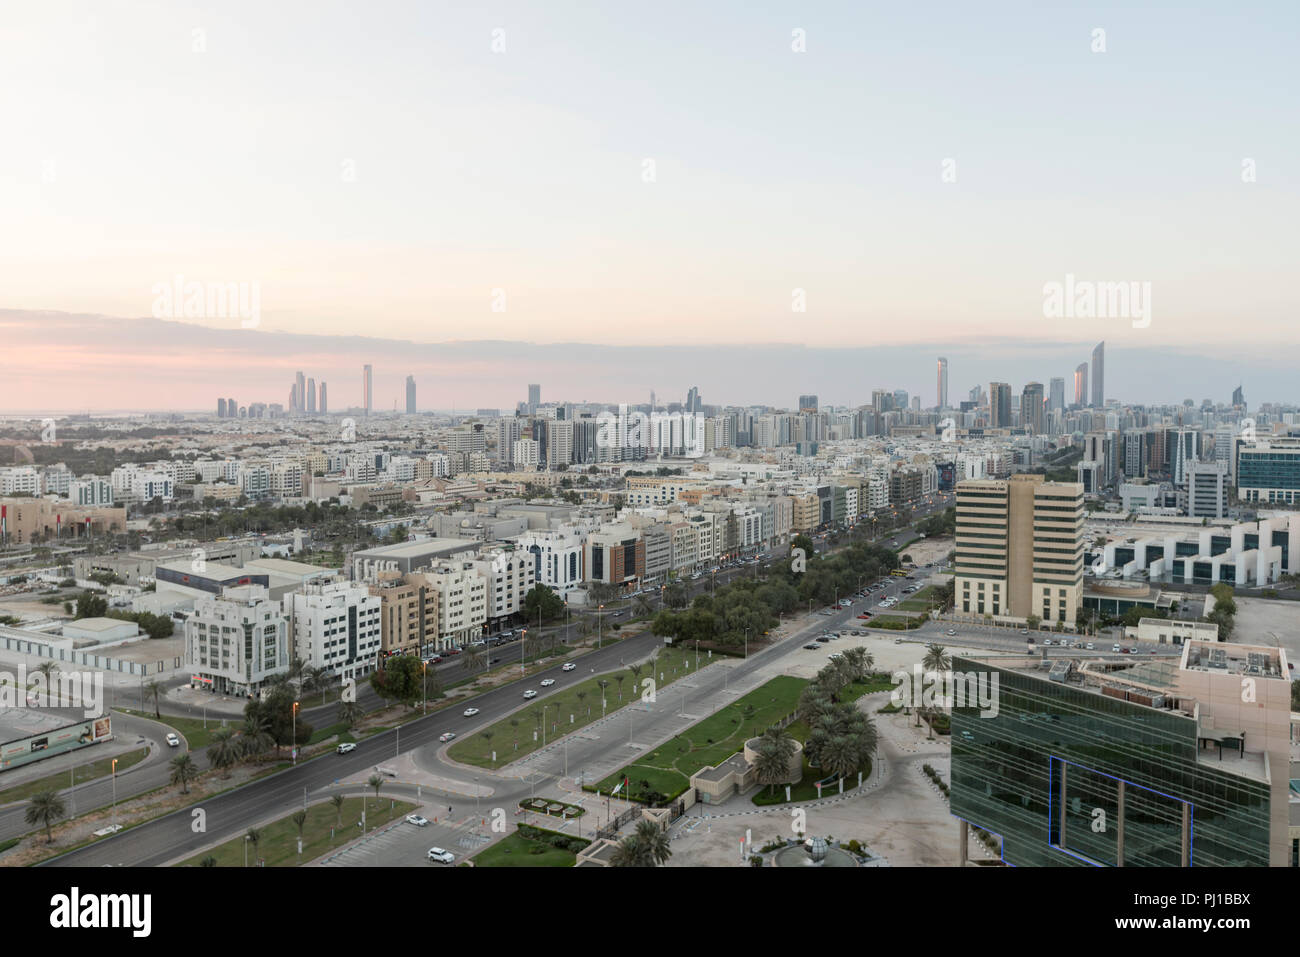 Looking towards downtown Abu Dhabi, with a view of skyscrapers and low-rise buildings, on the main Abu Dhabi Island Stock Photo